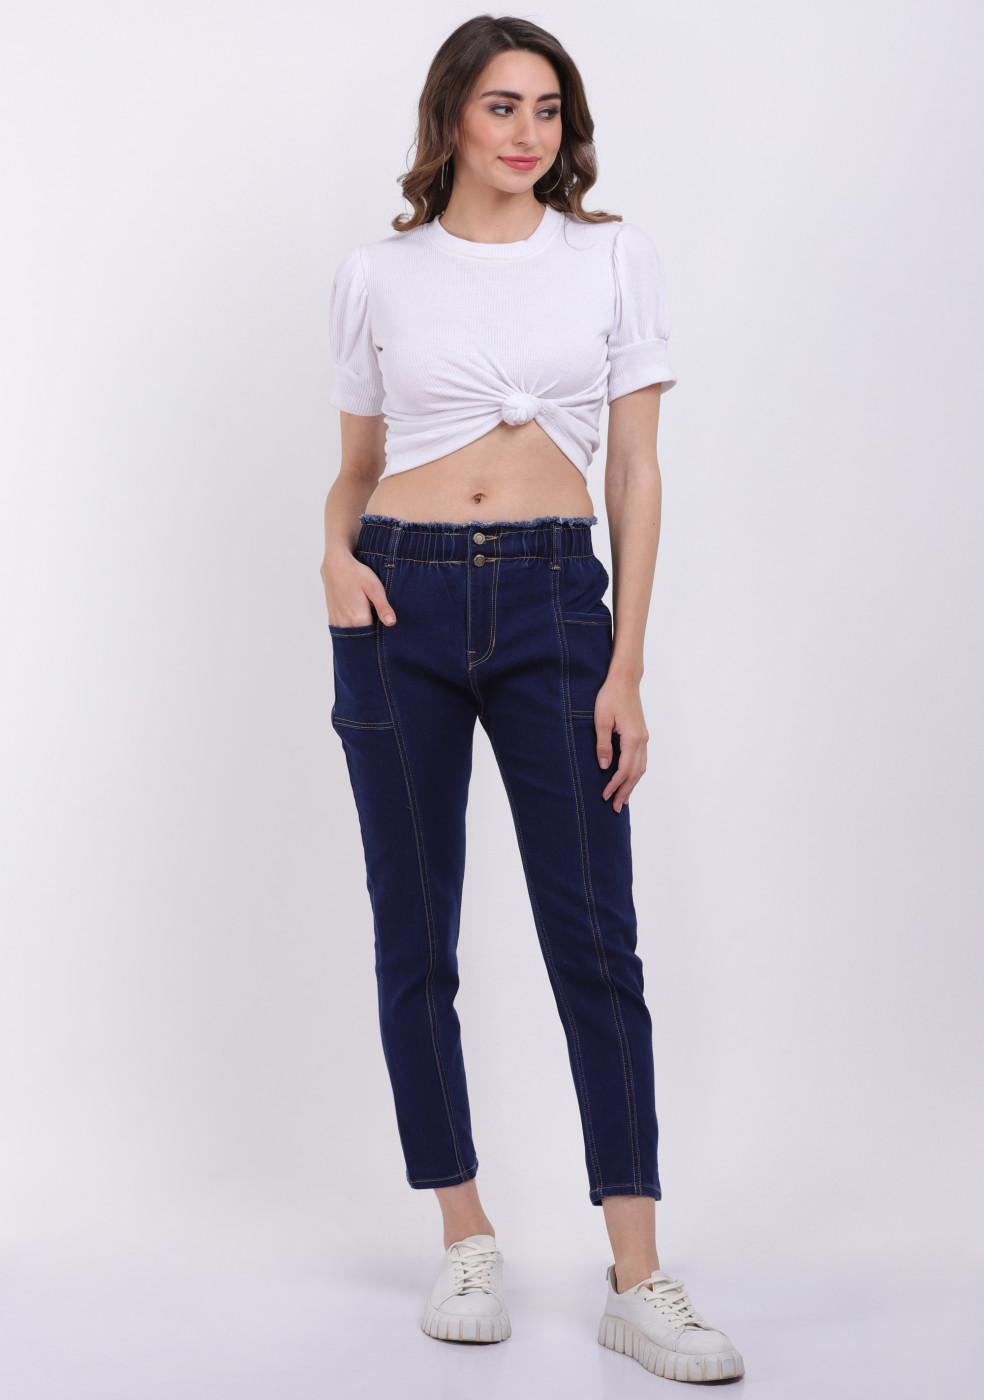 Navy Blue Comfortable Jeans For Women